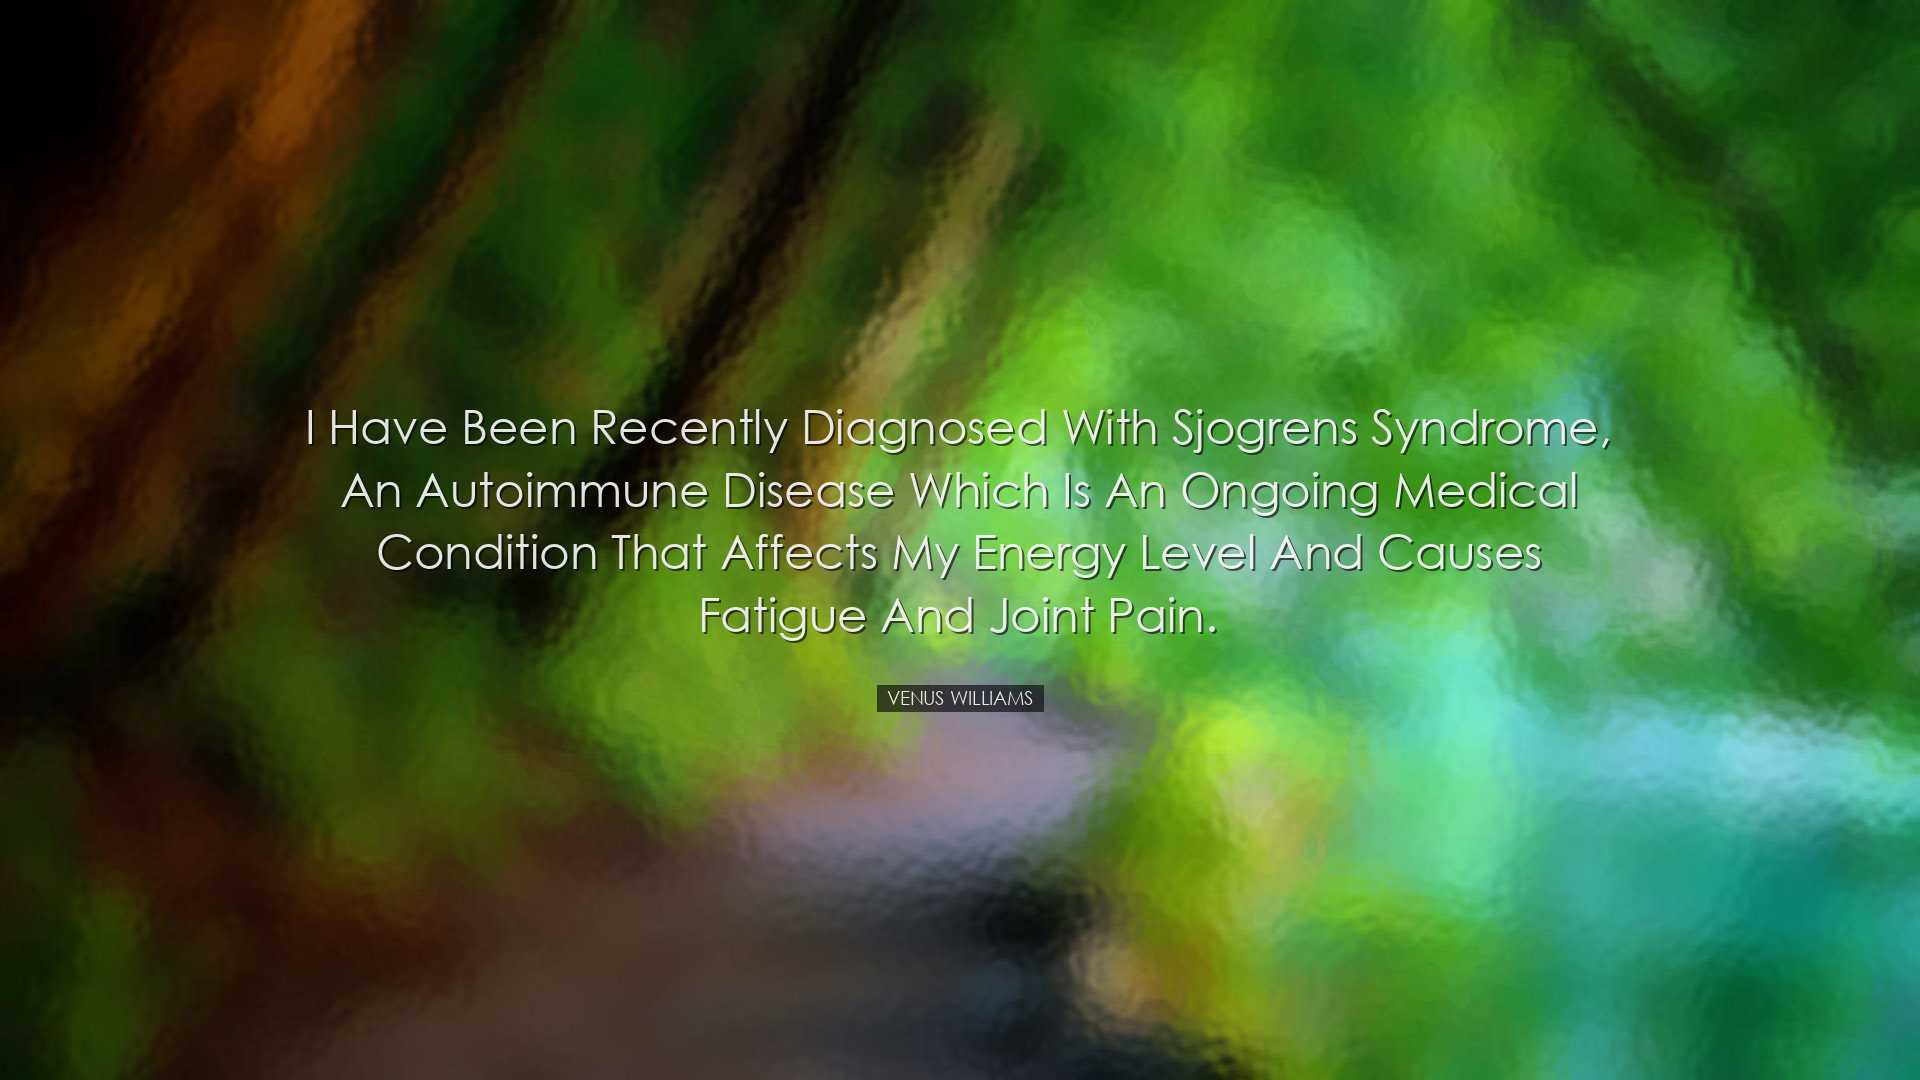 I have been recently diagnosed with Sjogrens Syndrome, an autoimmu